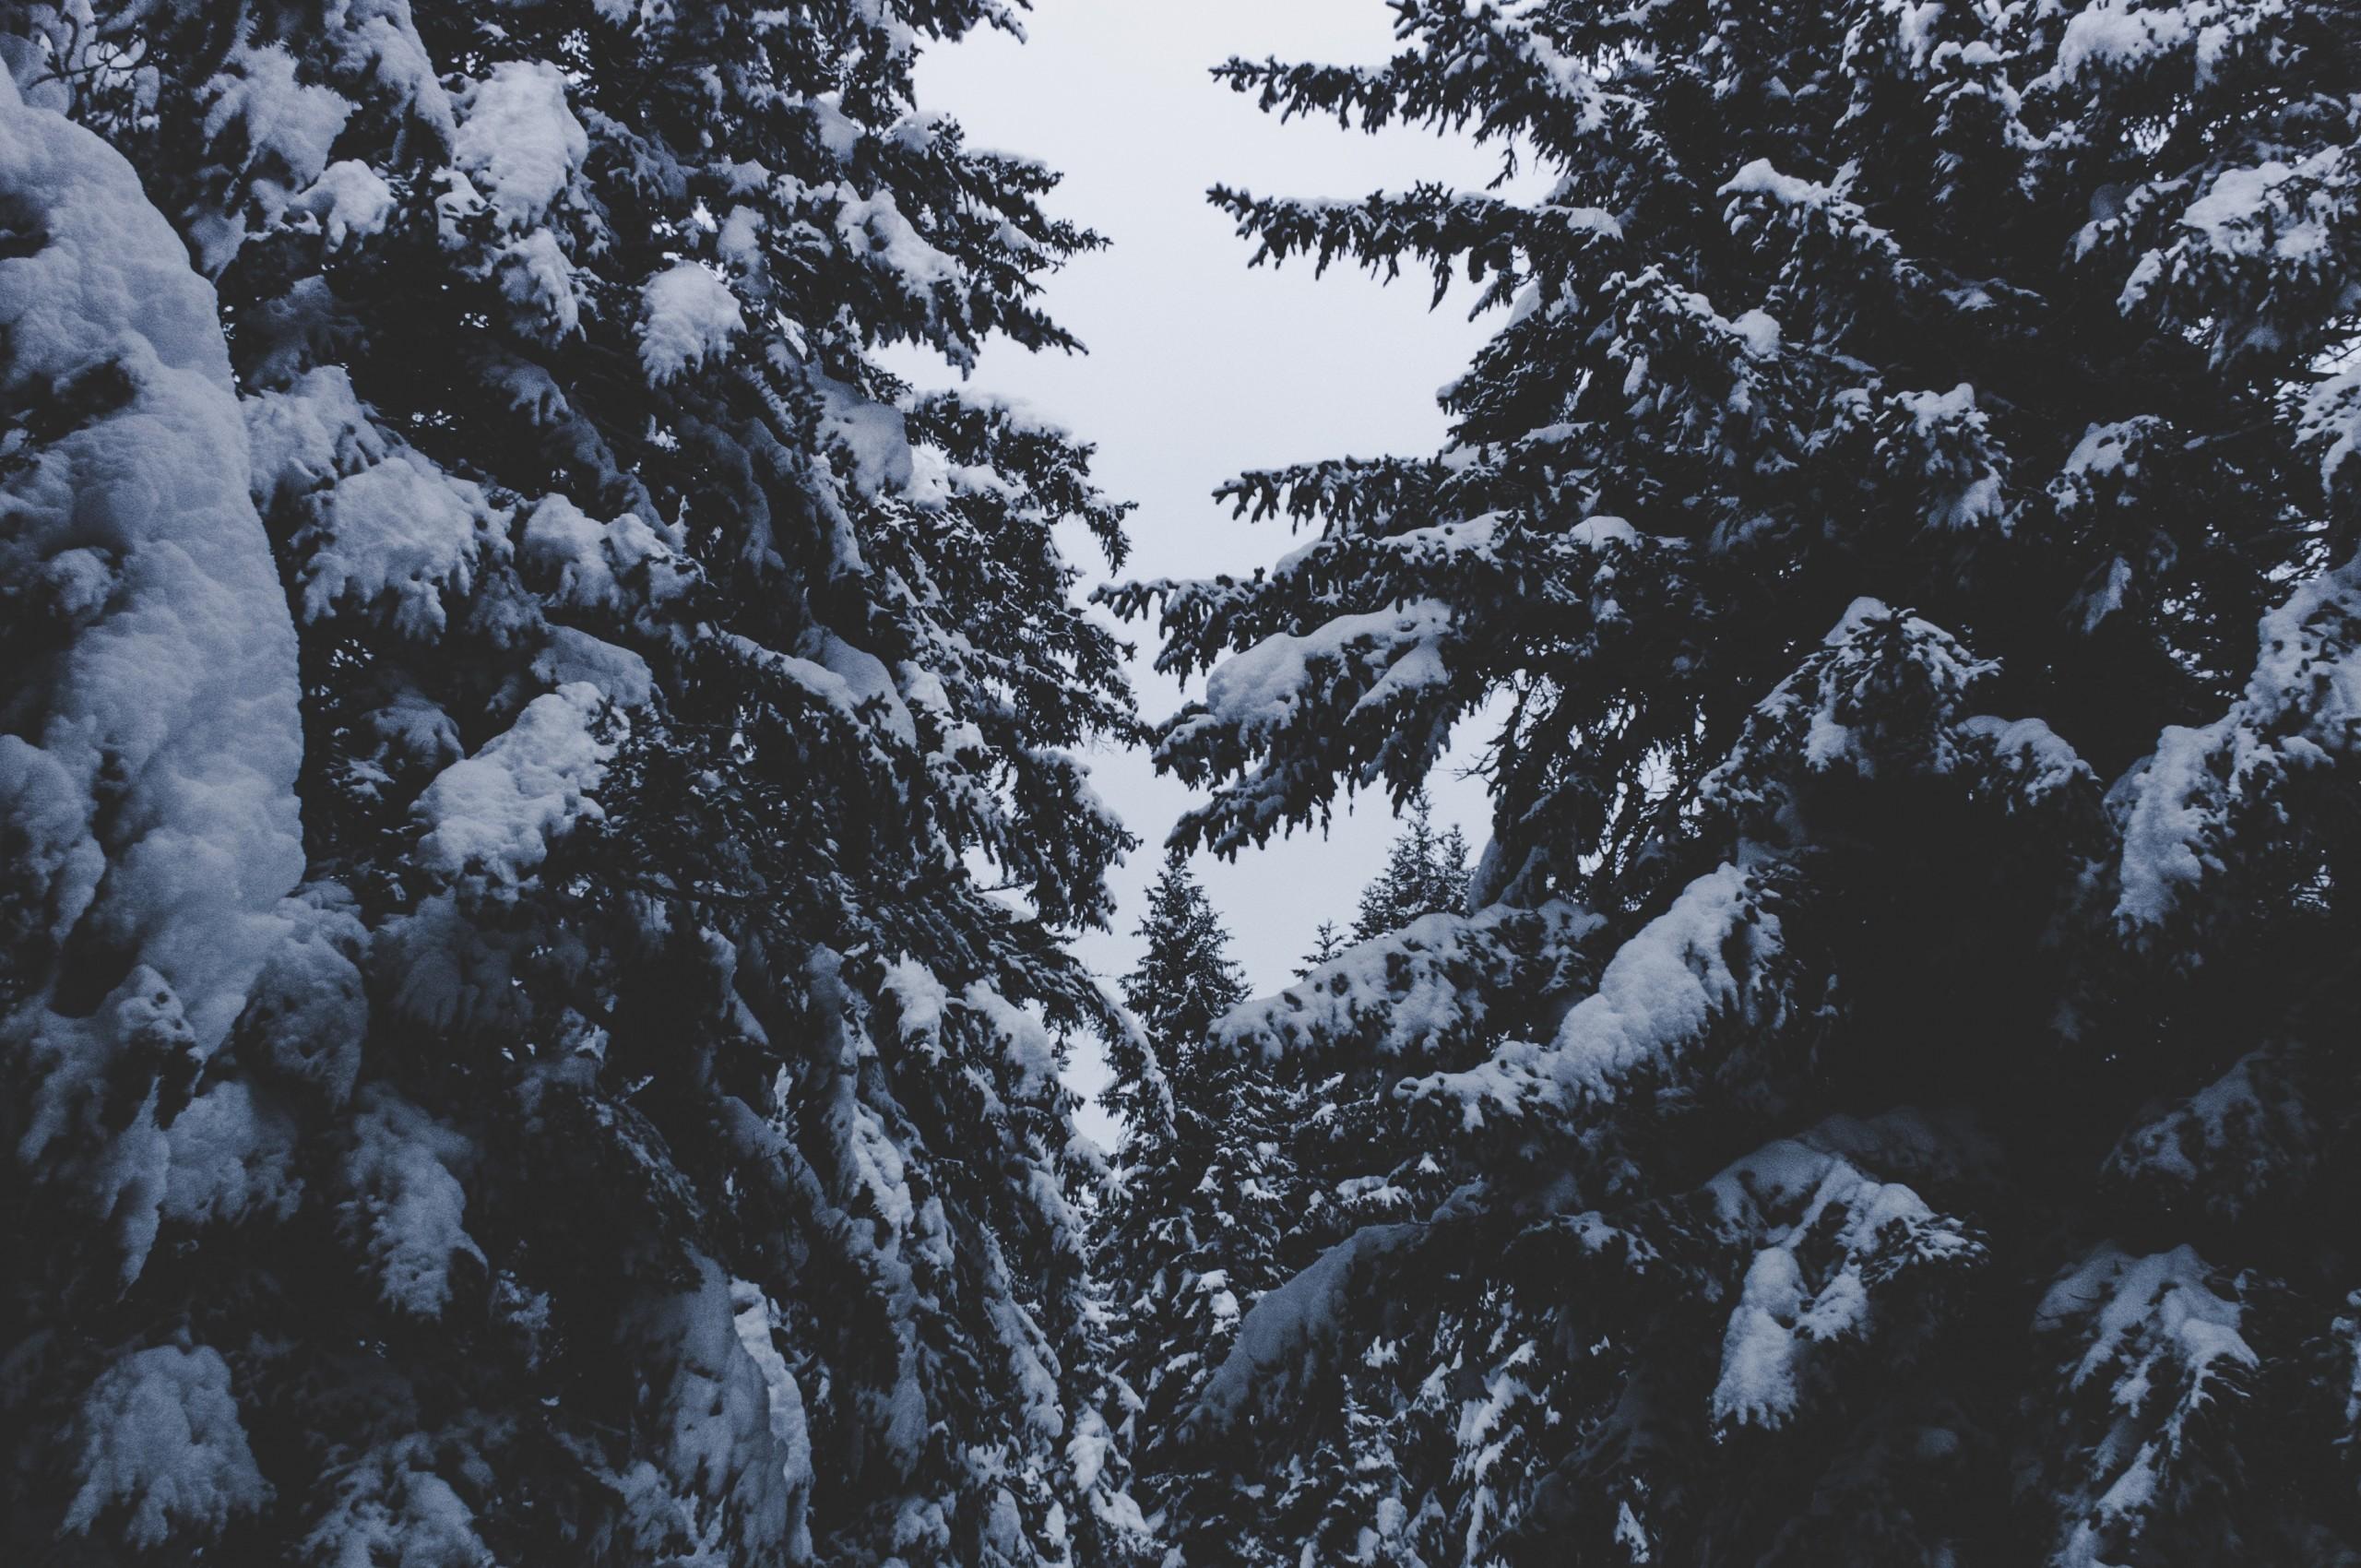 Download 2560x1700 Snow, Winter, Trees, Spruce, Sky